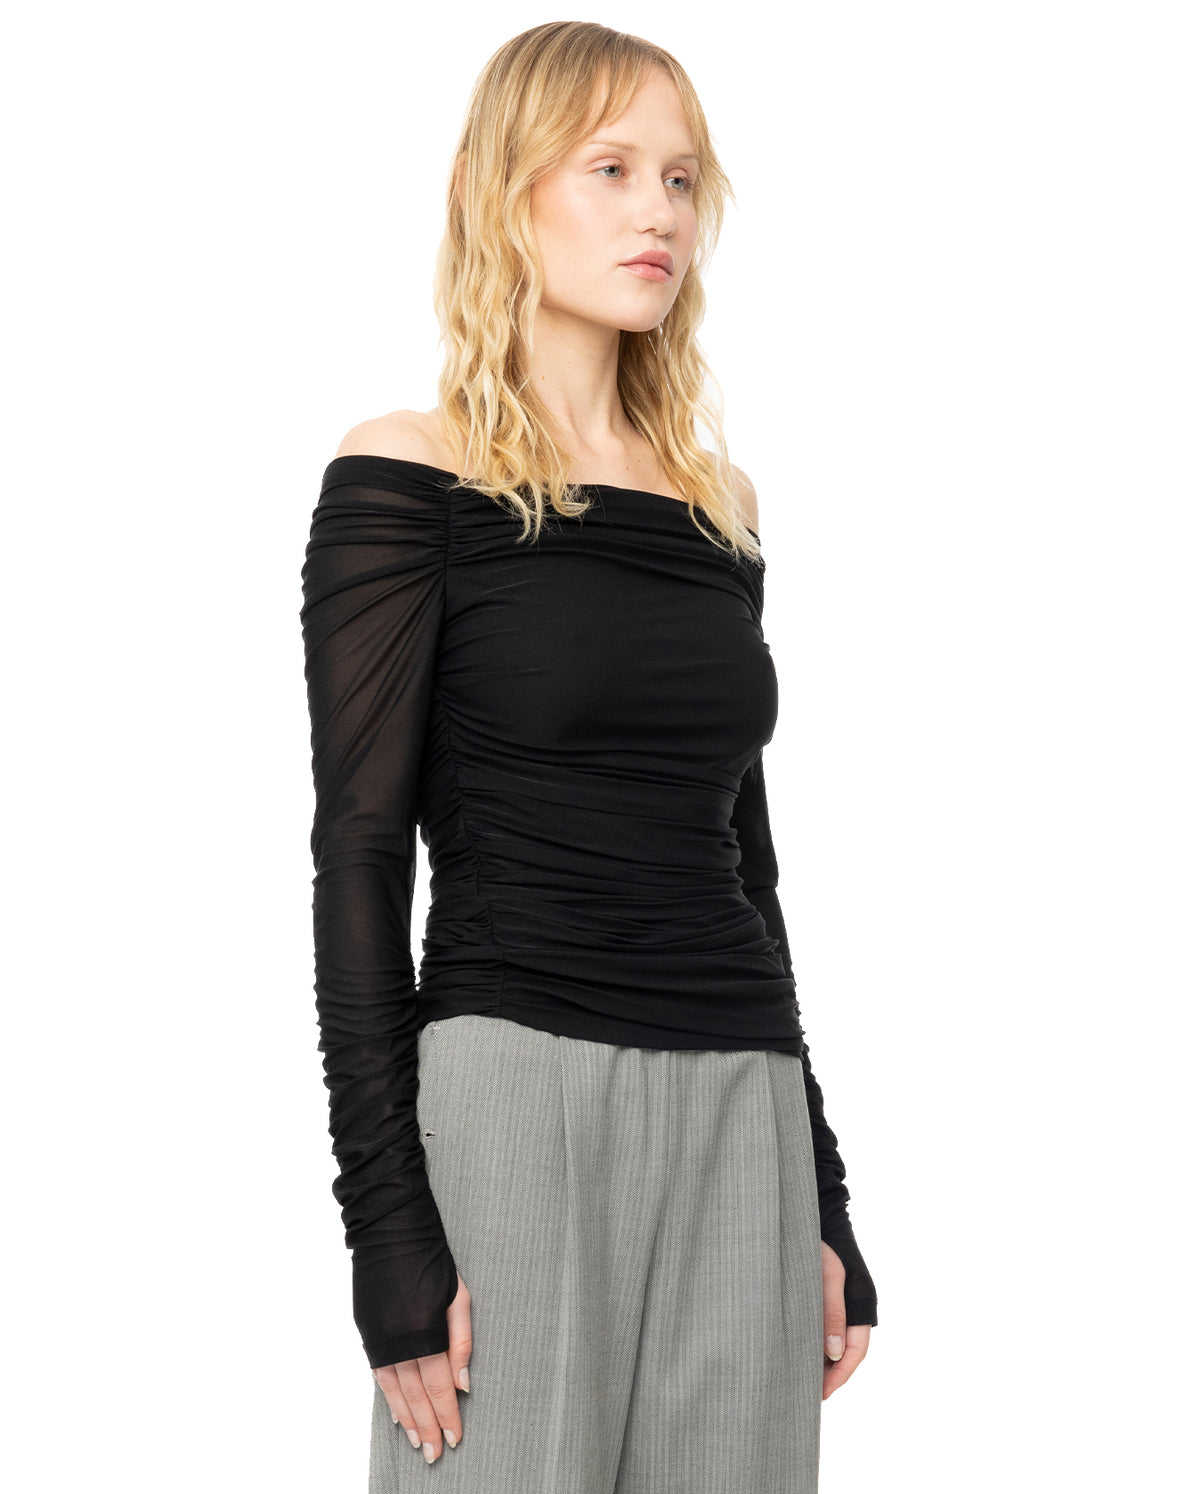 Ruched Crepe Asymmetrical Top - Black